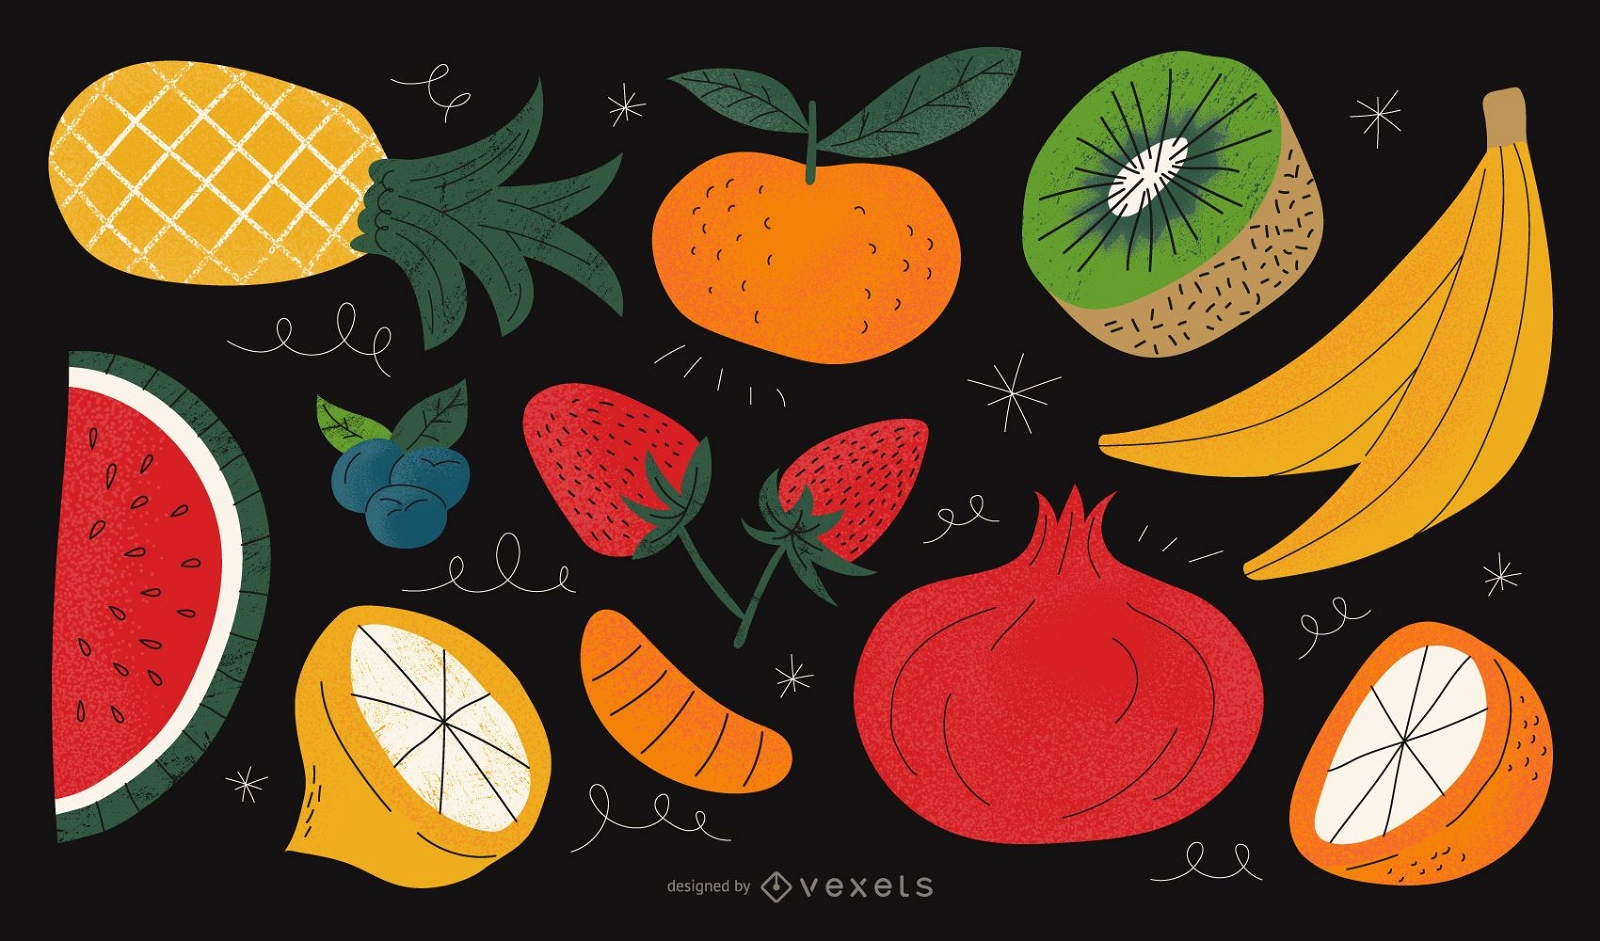 Textured fruits vector collection